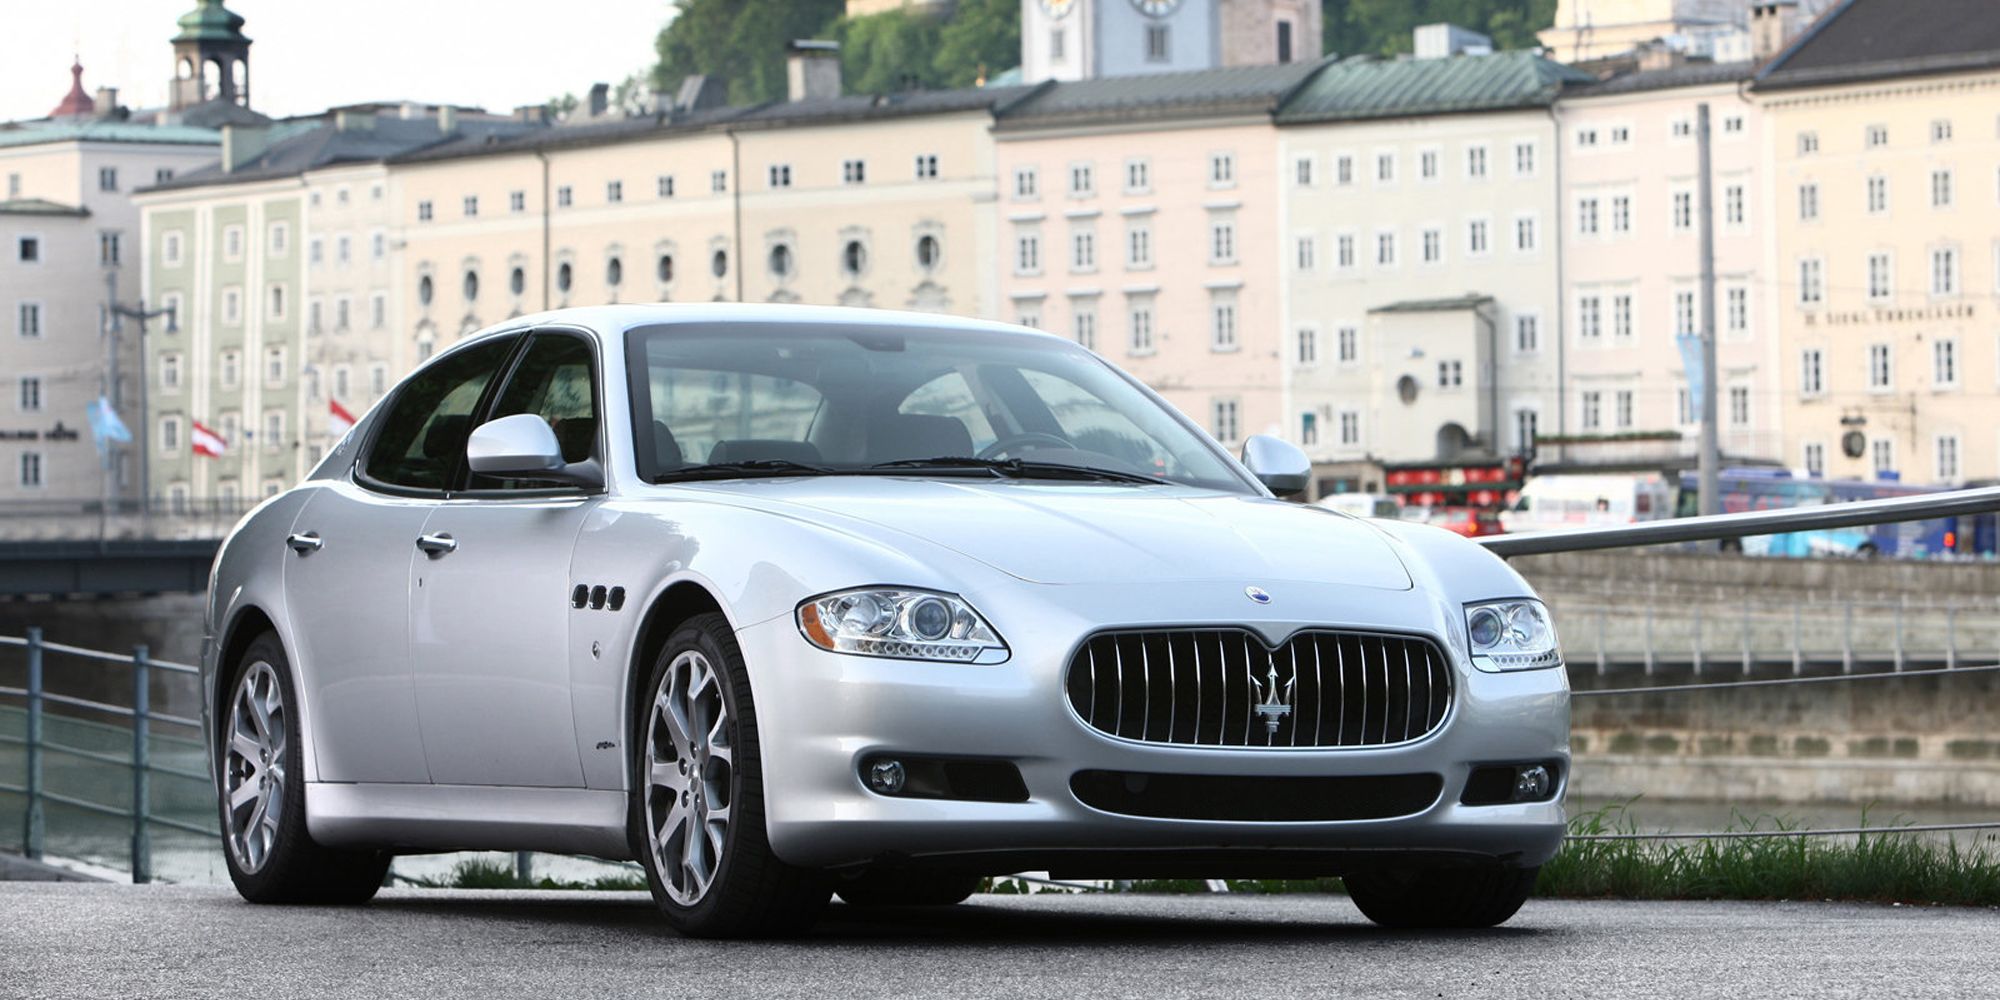 The front of the Quattroporte